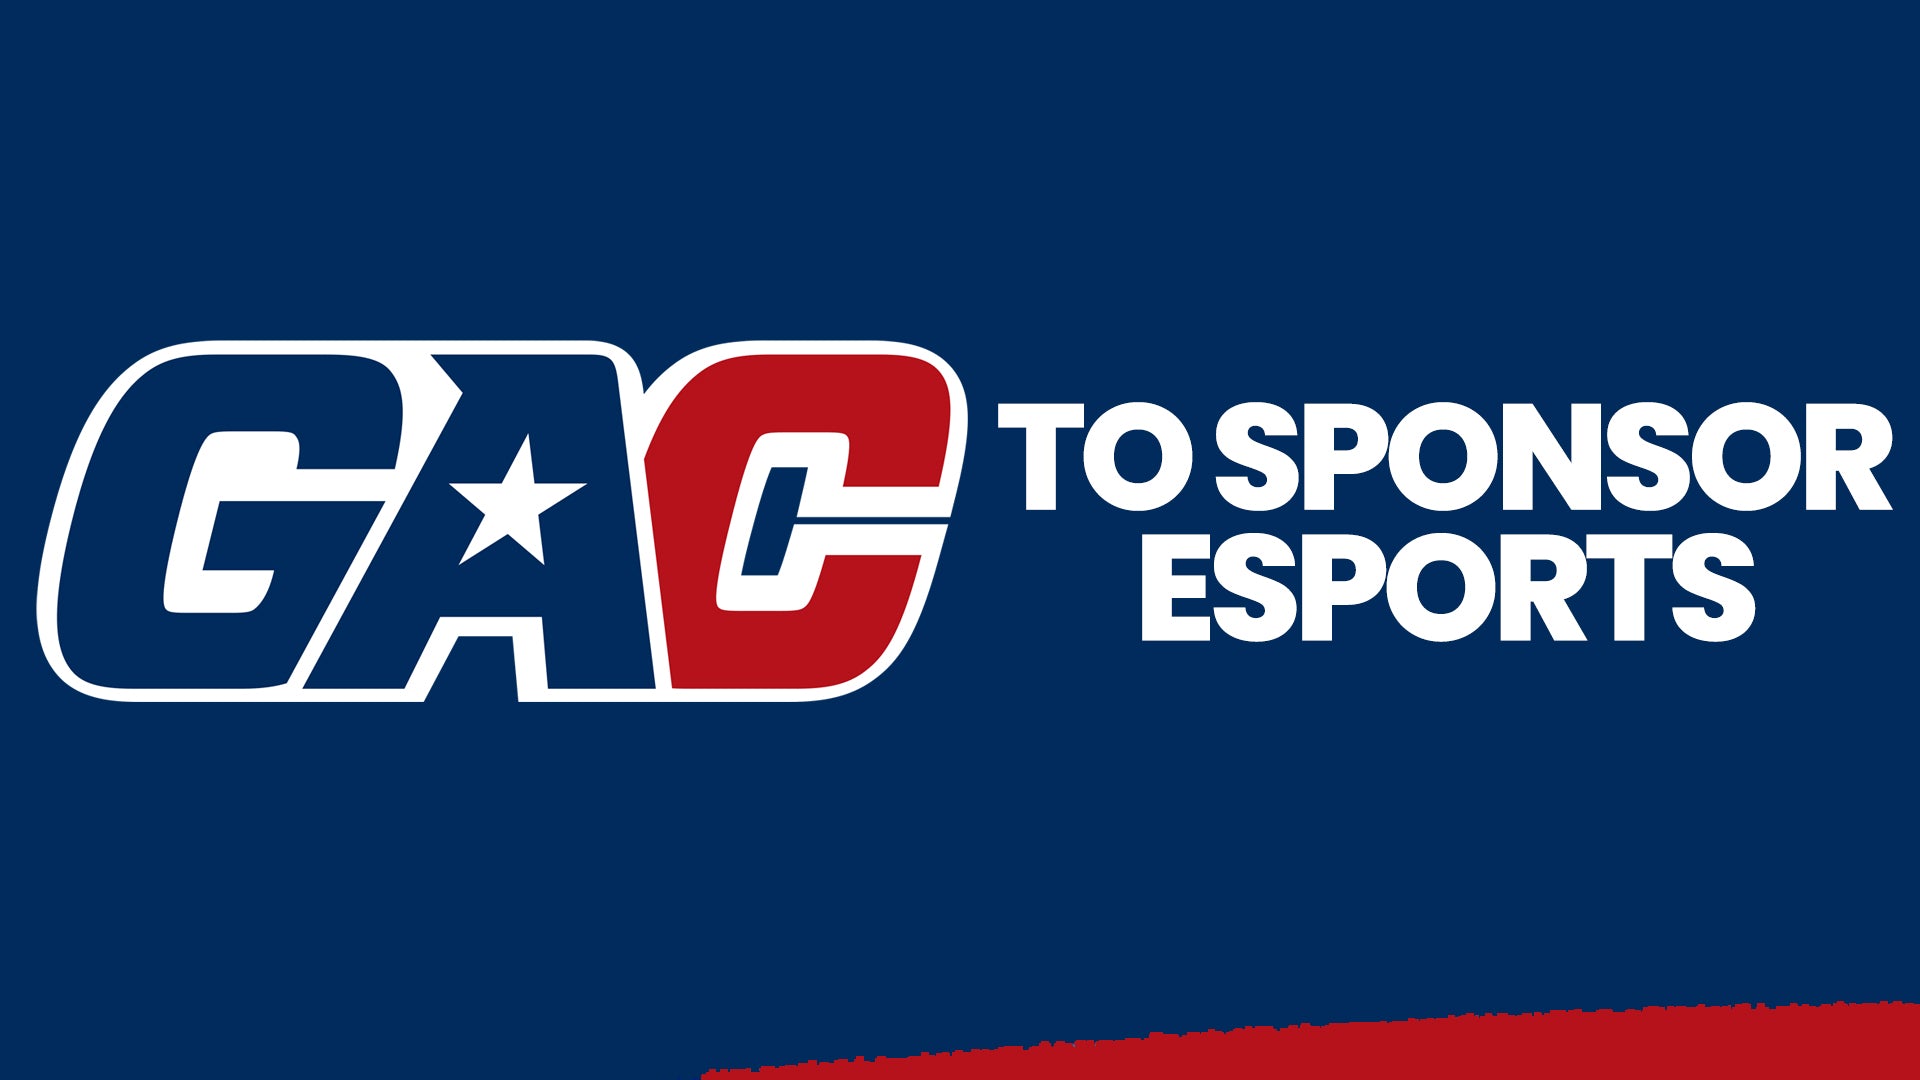 NECC to Support the Great American Conference as the League Announces the Addition of Esports